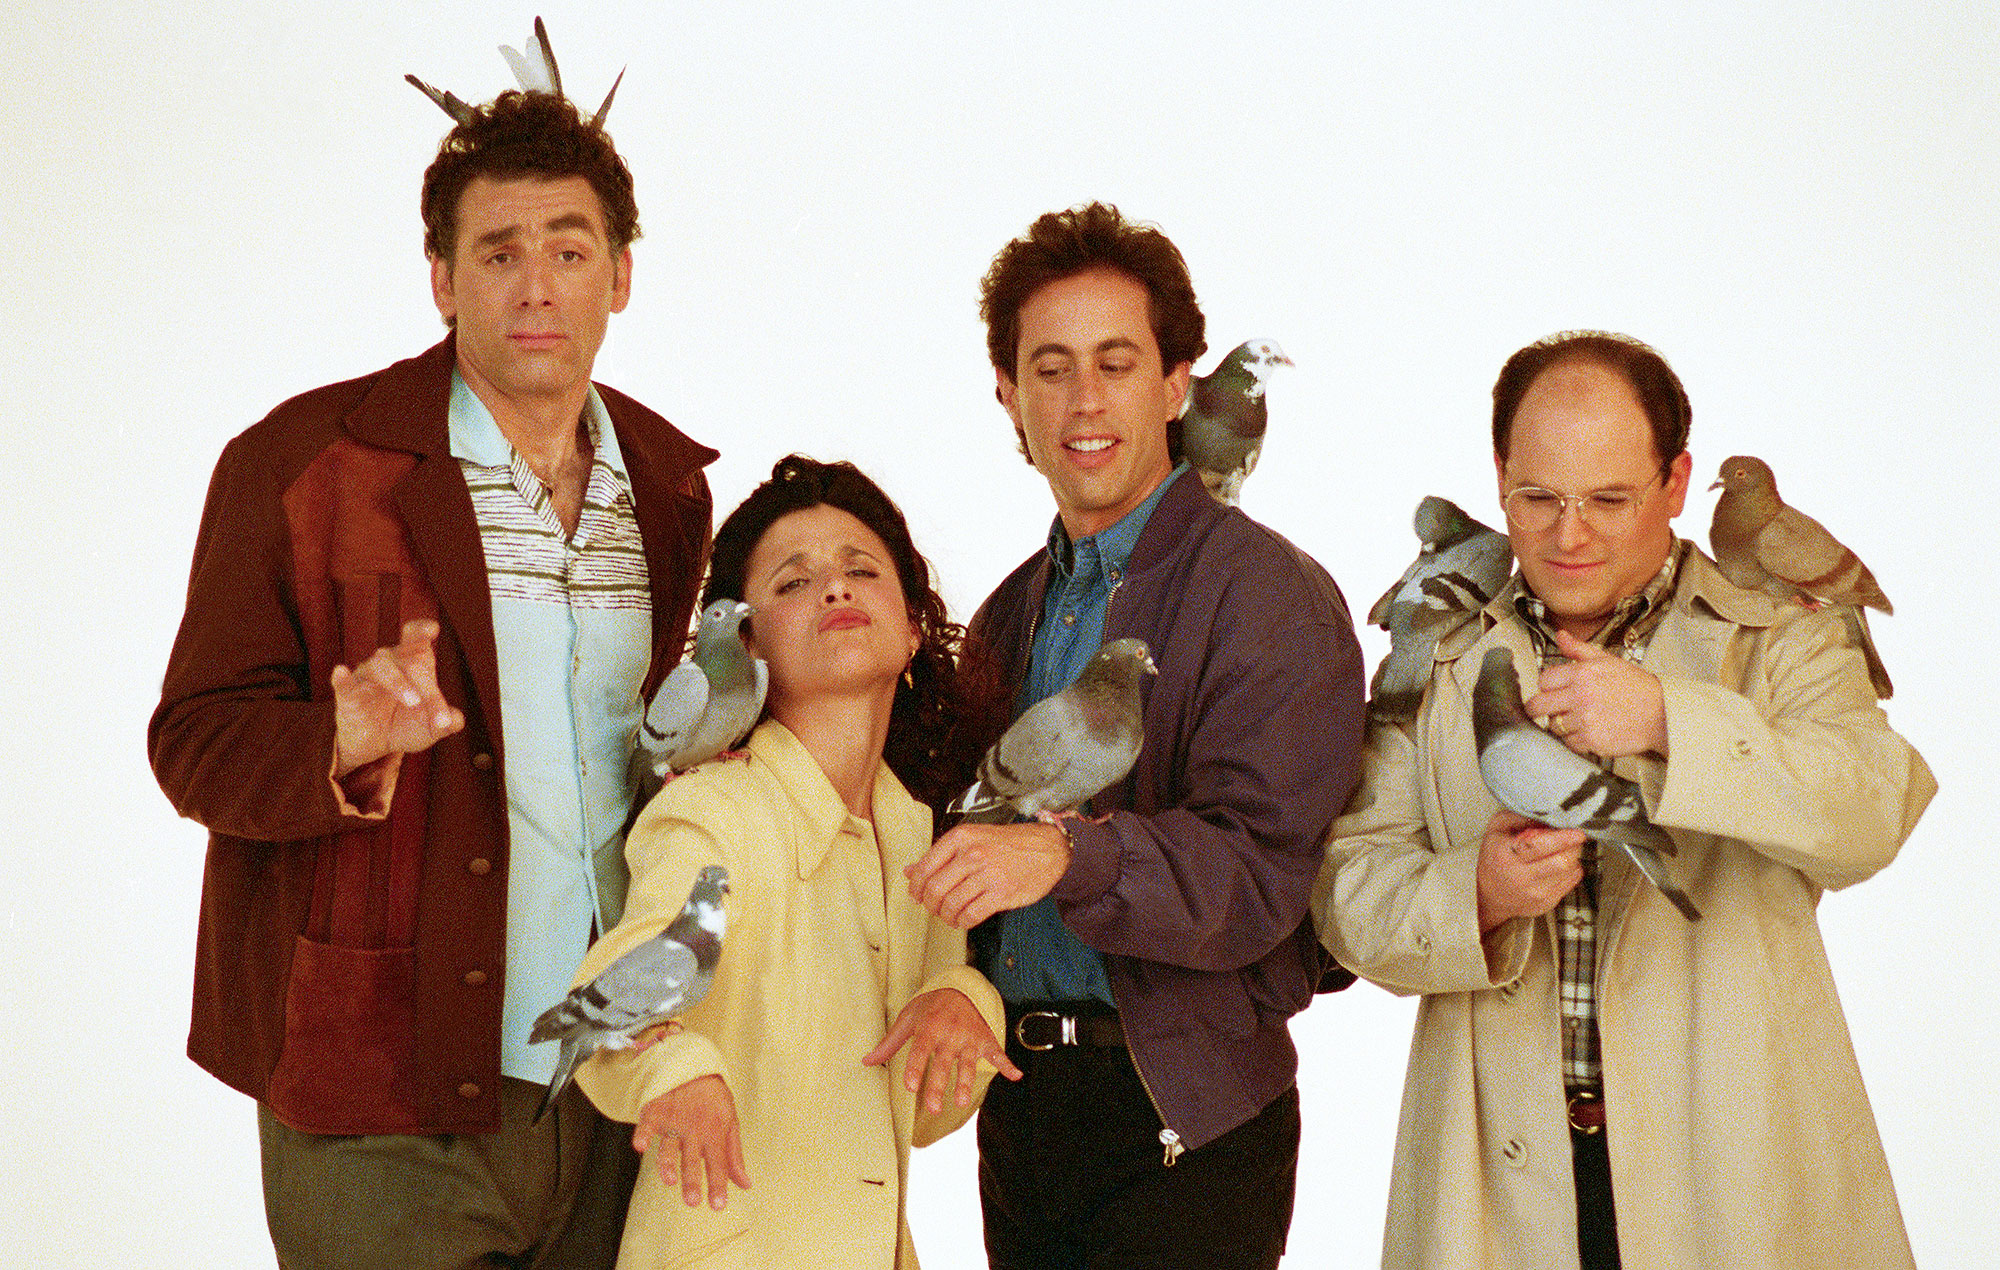 Jason Alexander says he doesn’t know anything about rumoured ‘Seinfeld’ reboot